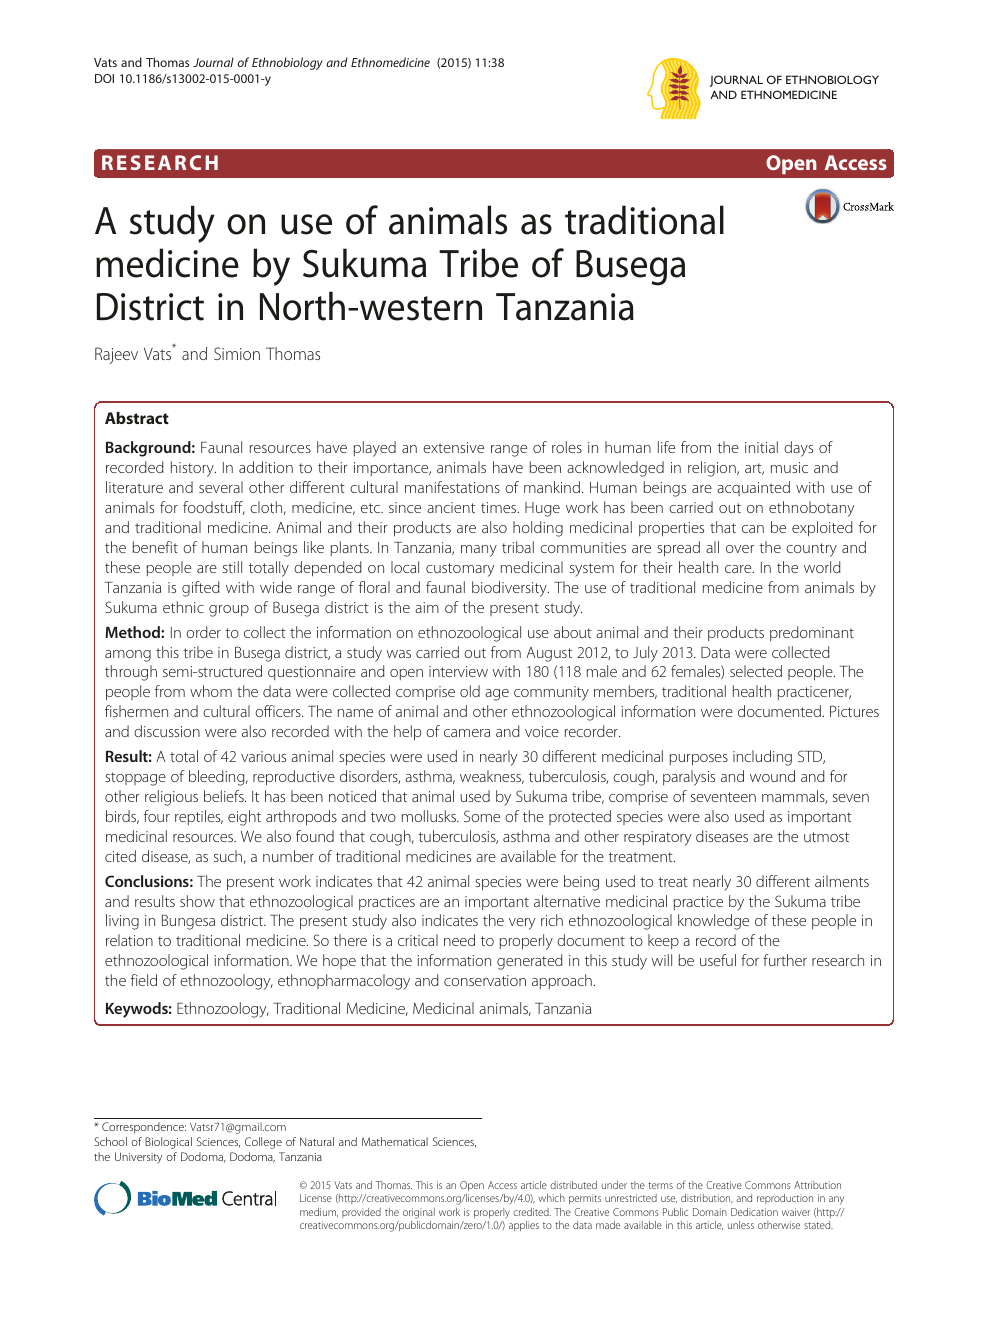 A study on use of animals as traditional medicine by Sukuma Tribe of Busega  District in North-western Tanzania – topic of research paper in Veterinary  science. Download scholarly article PDF and read